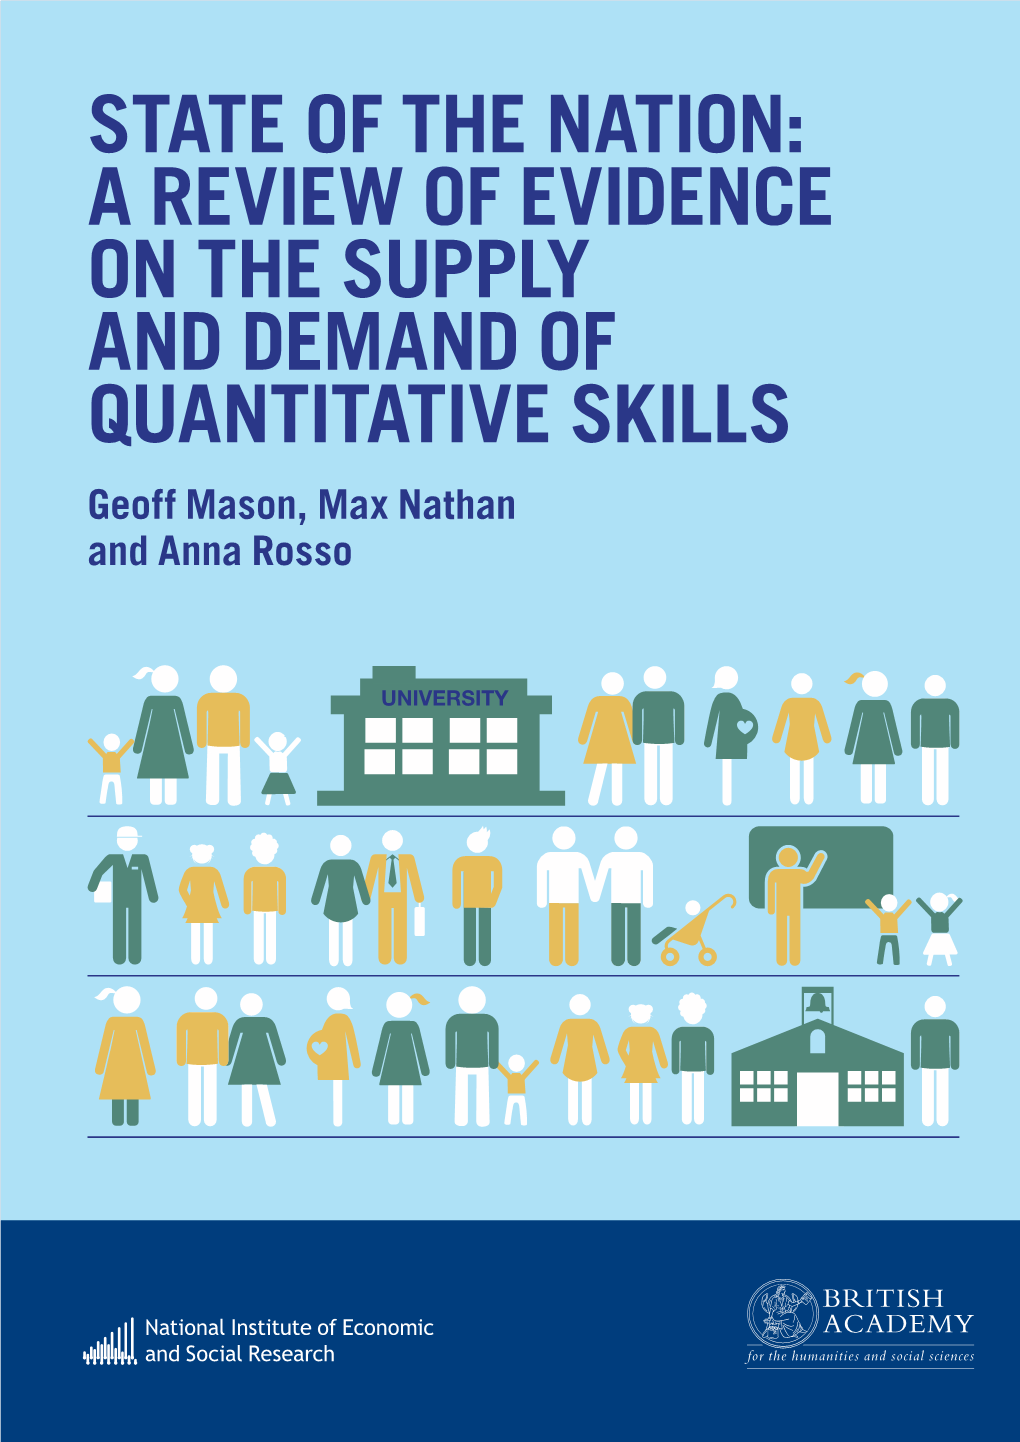 A Review of Evidence on the Supply and Demand of Quantitative Skills